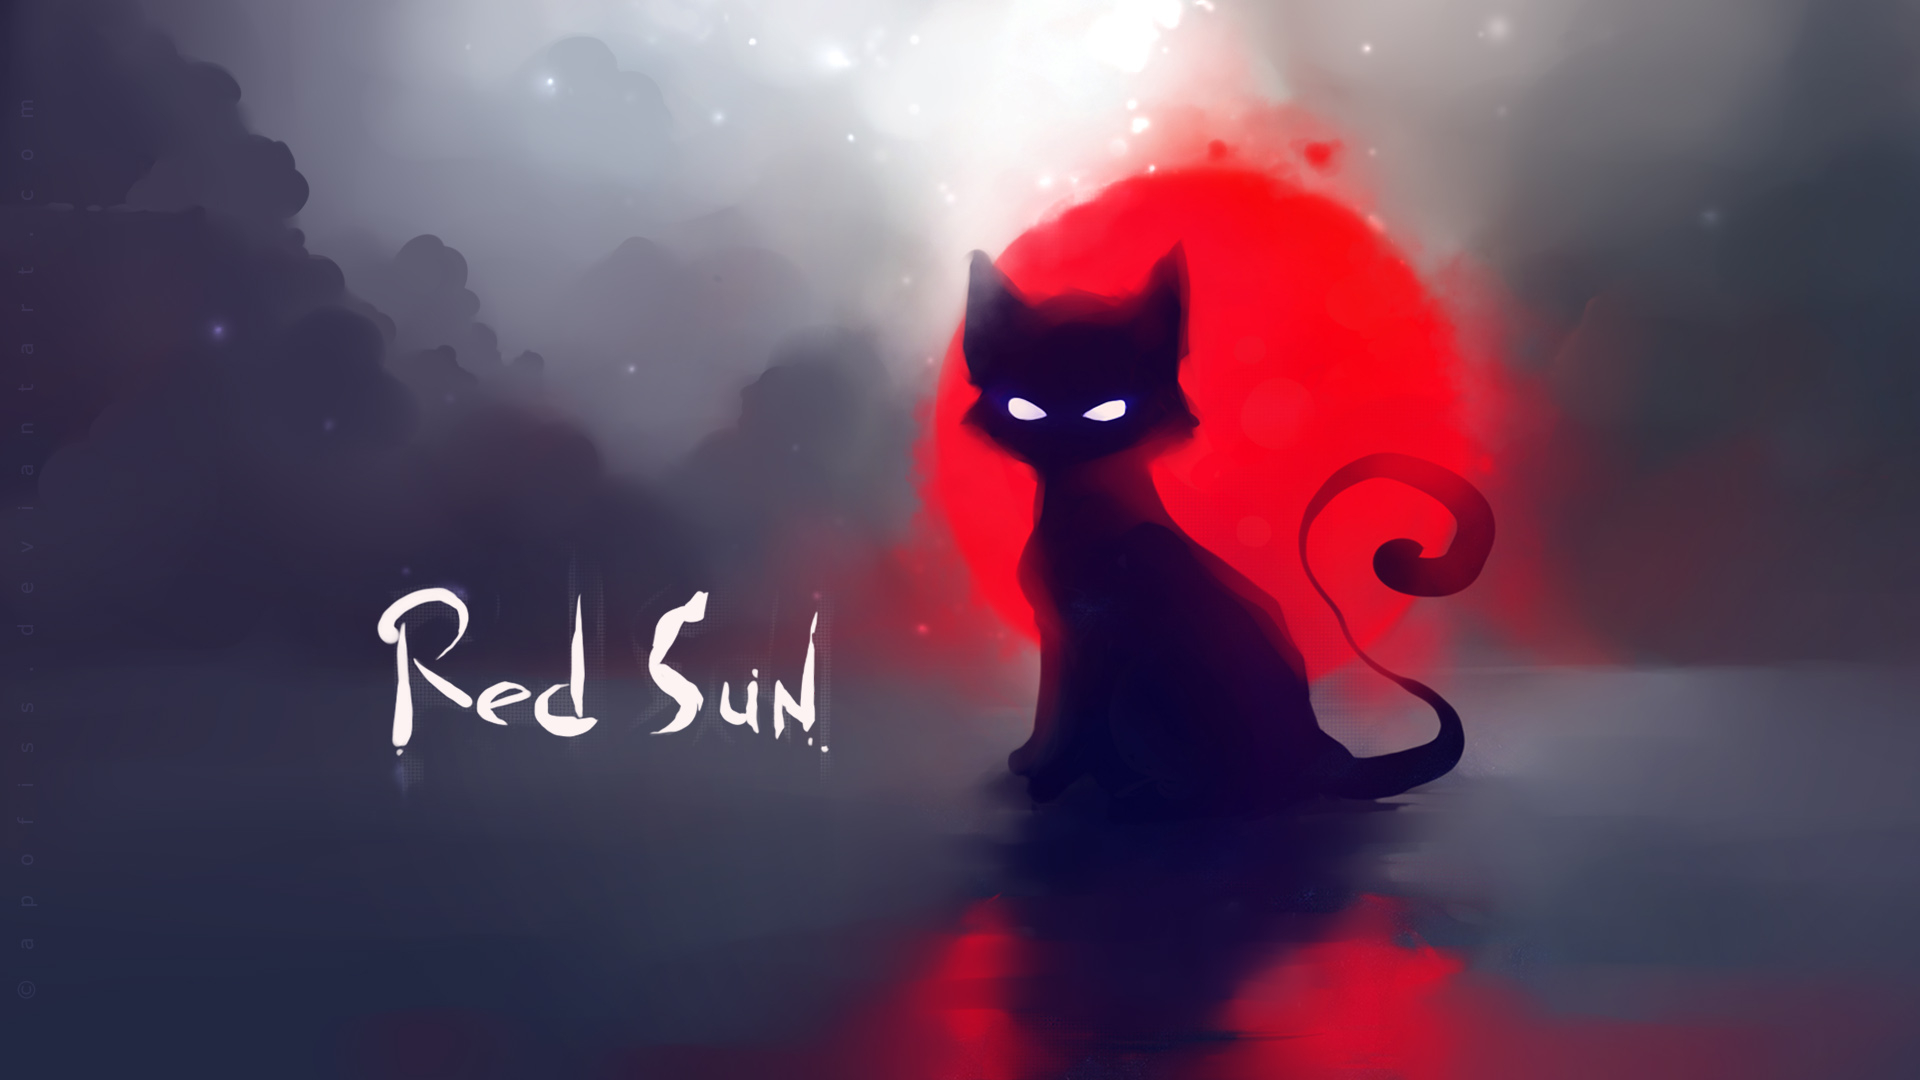 Red Sun by Apofiss